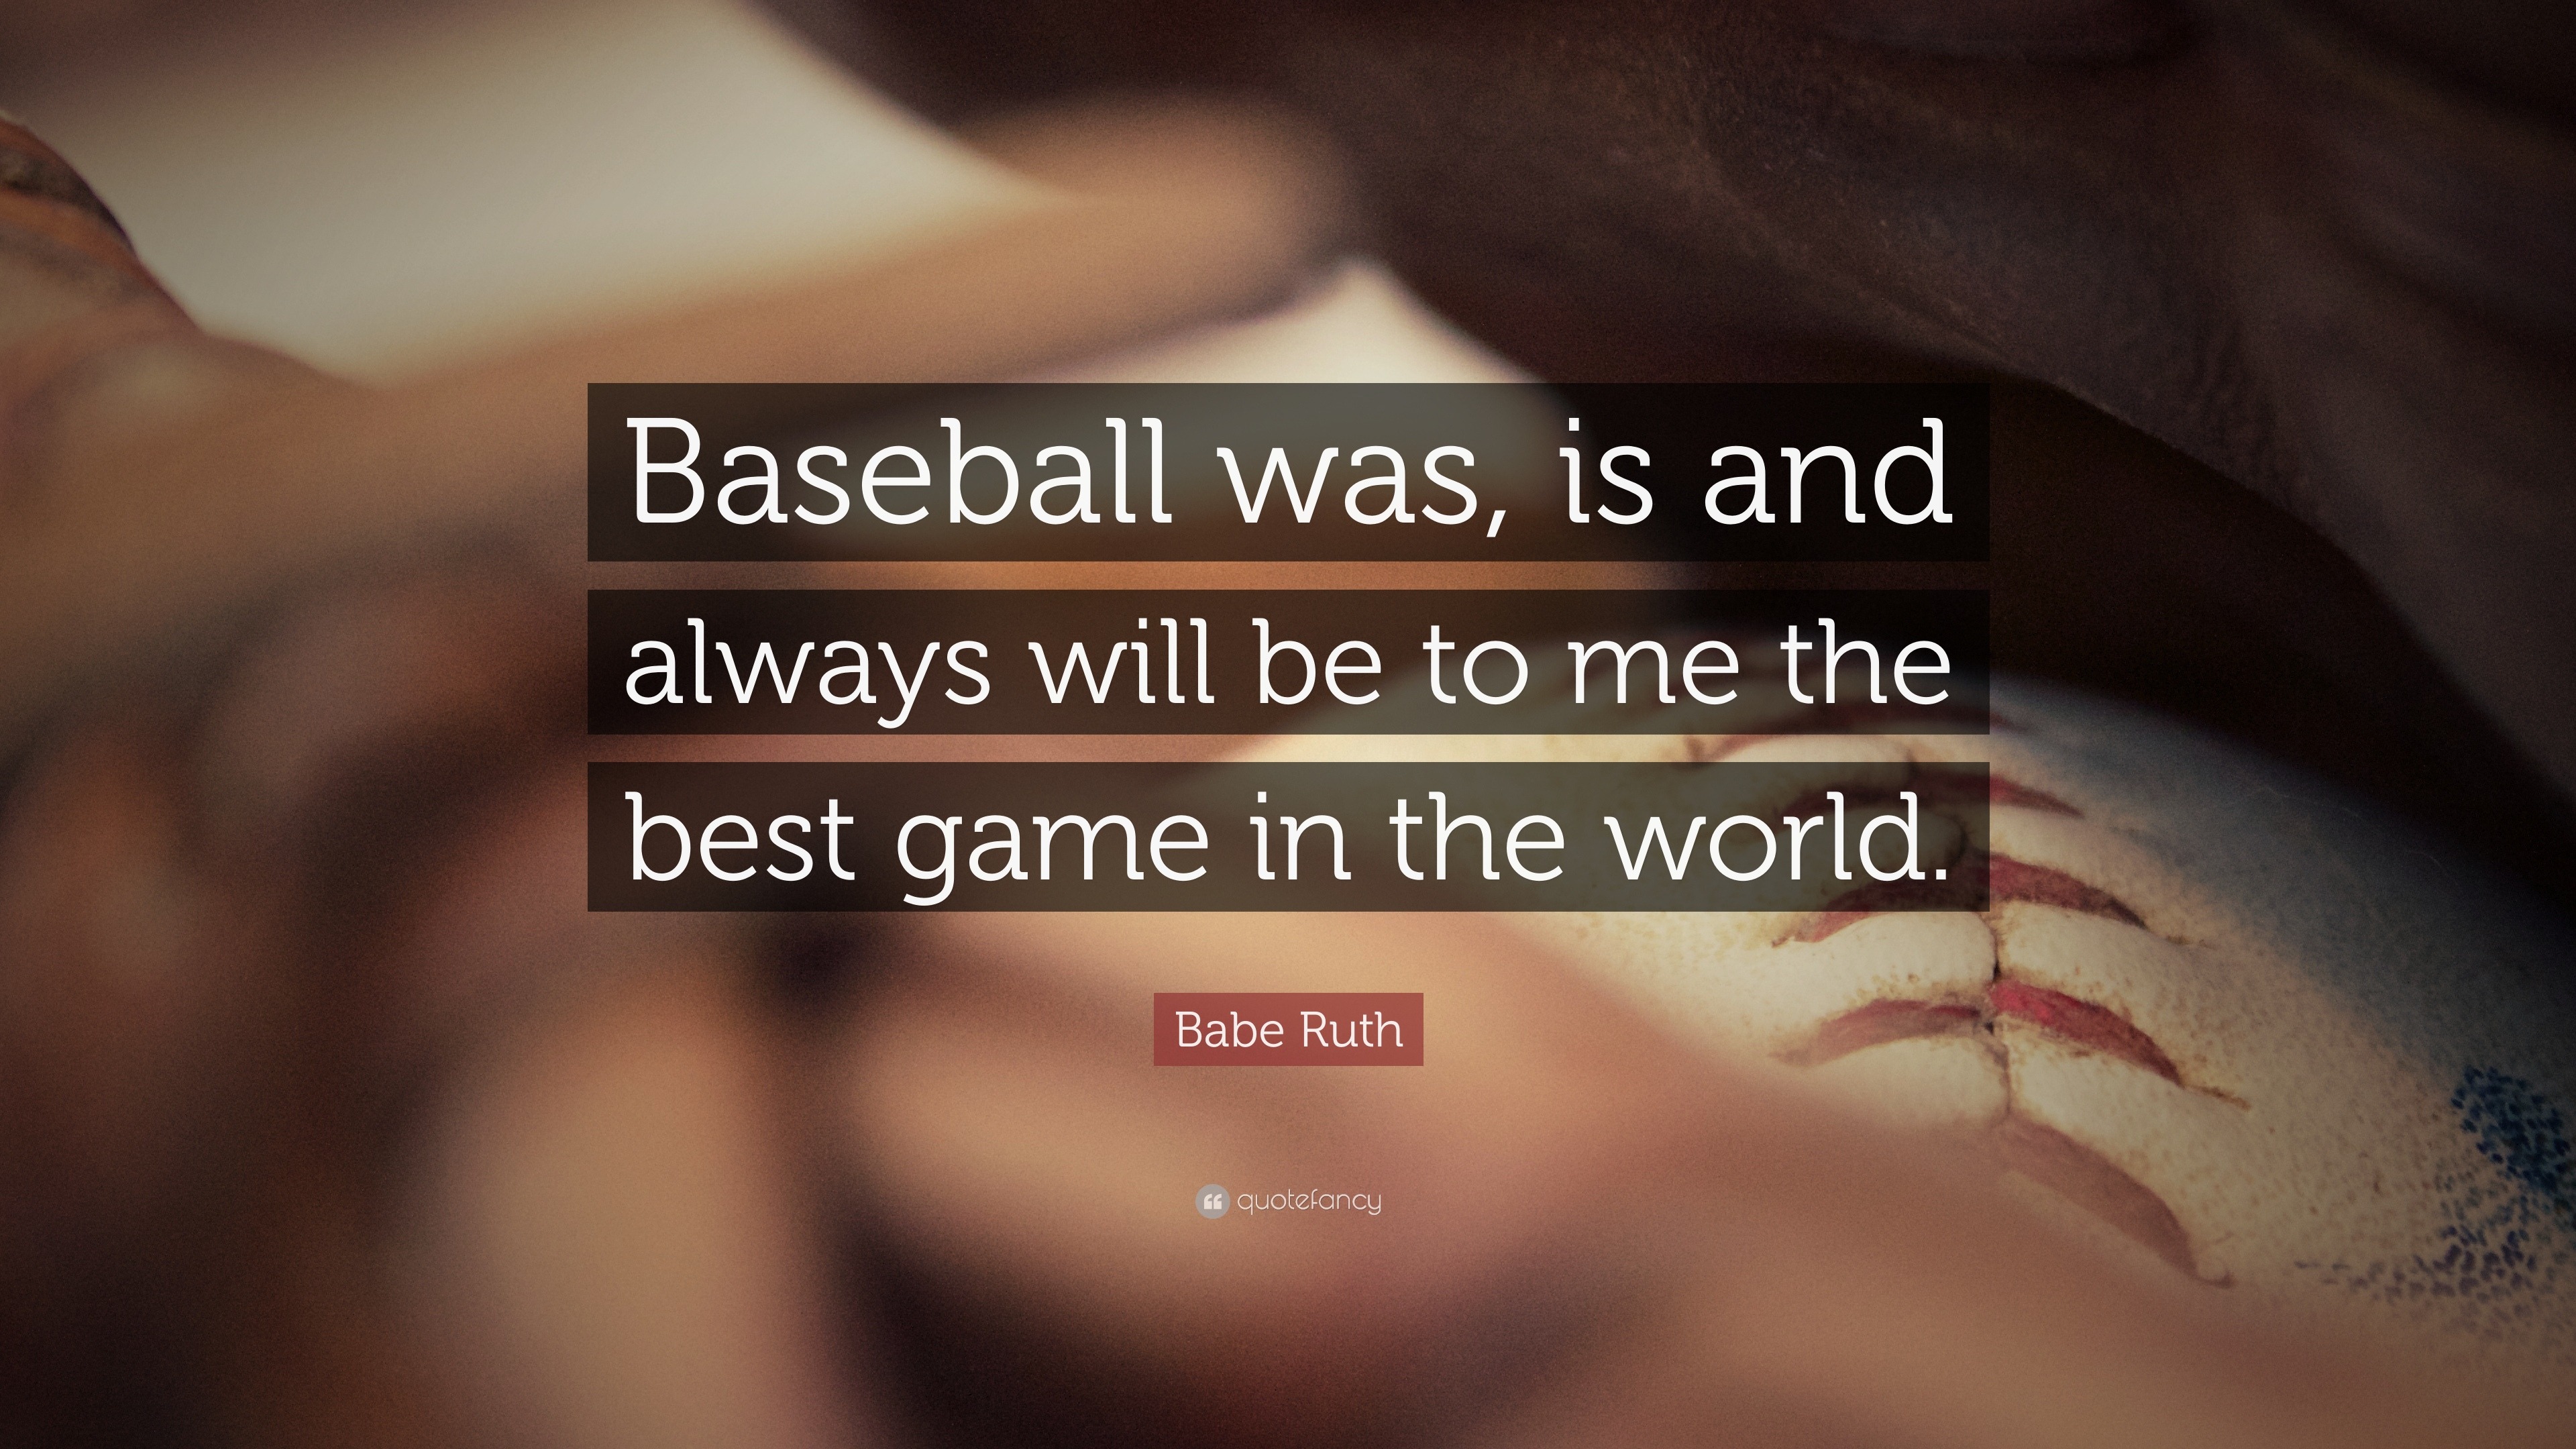 Babe Ruth Quote: “Baseball was, is and always will be to me the best game in